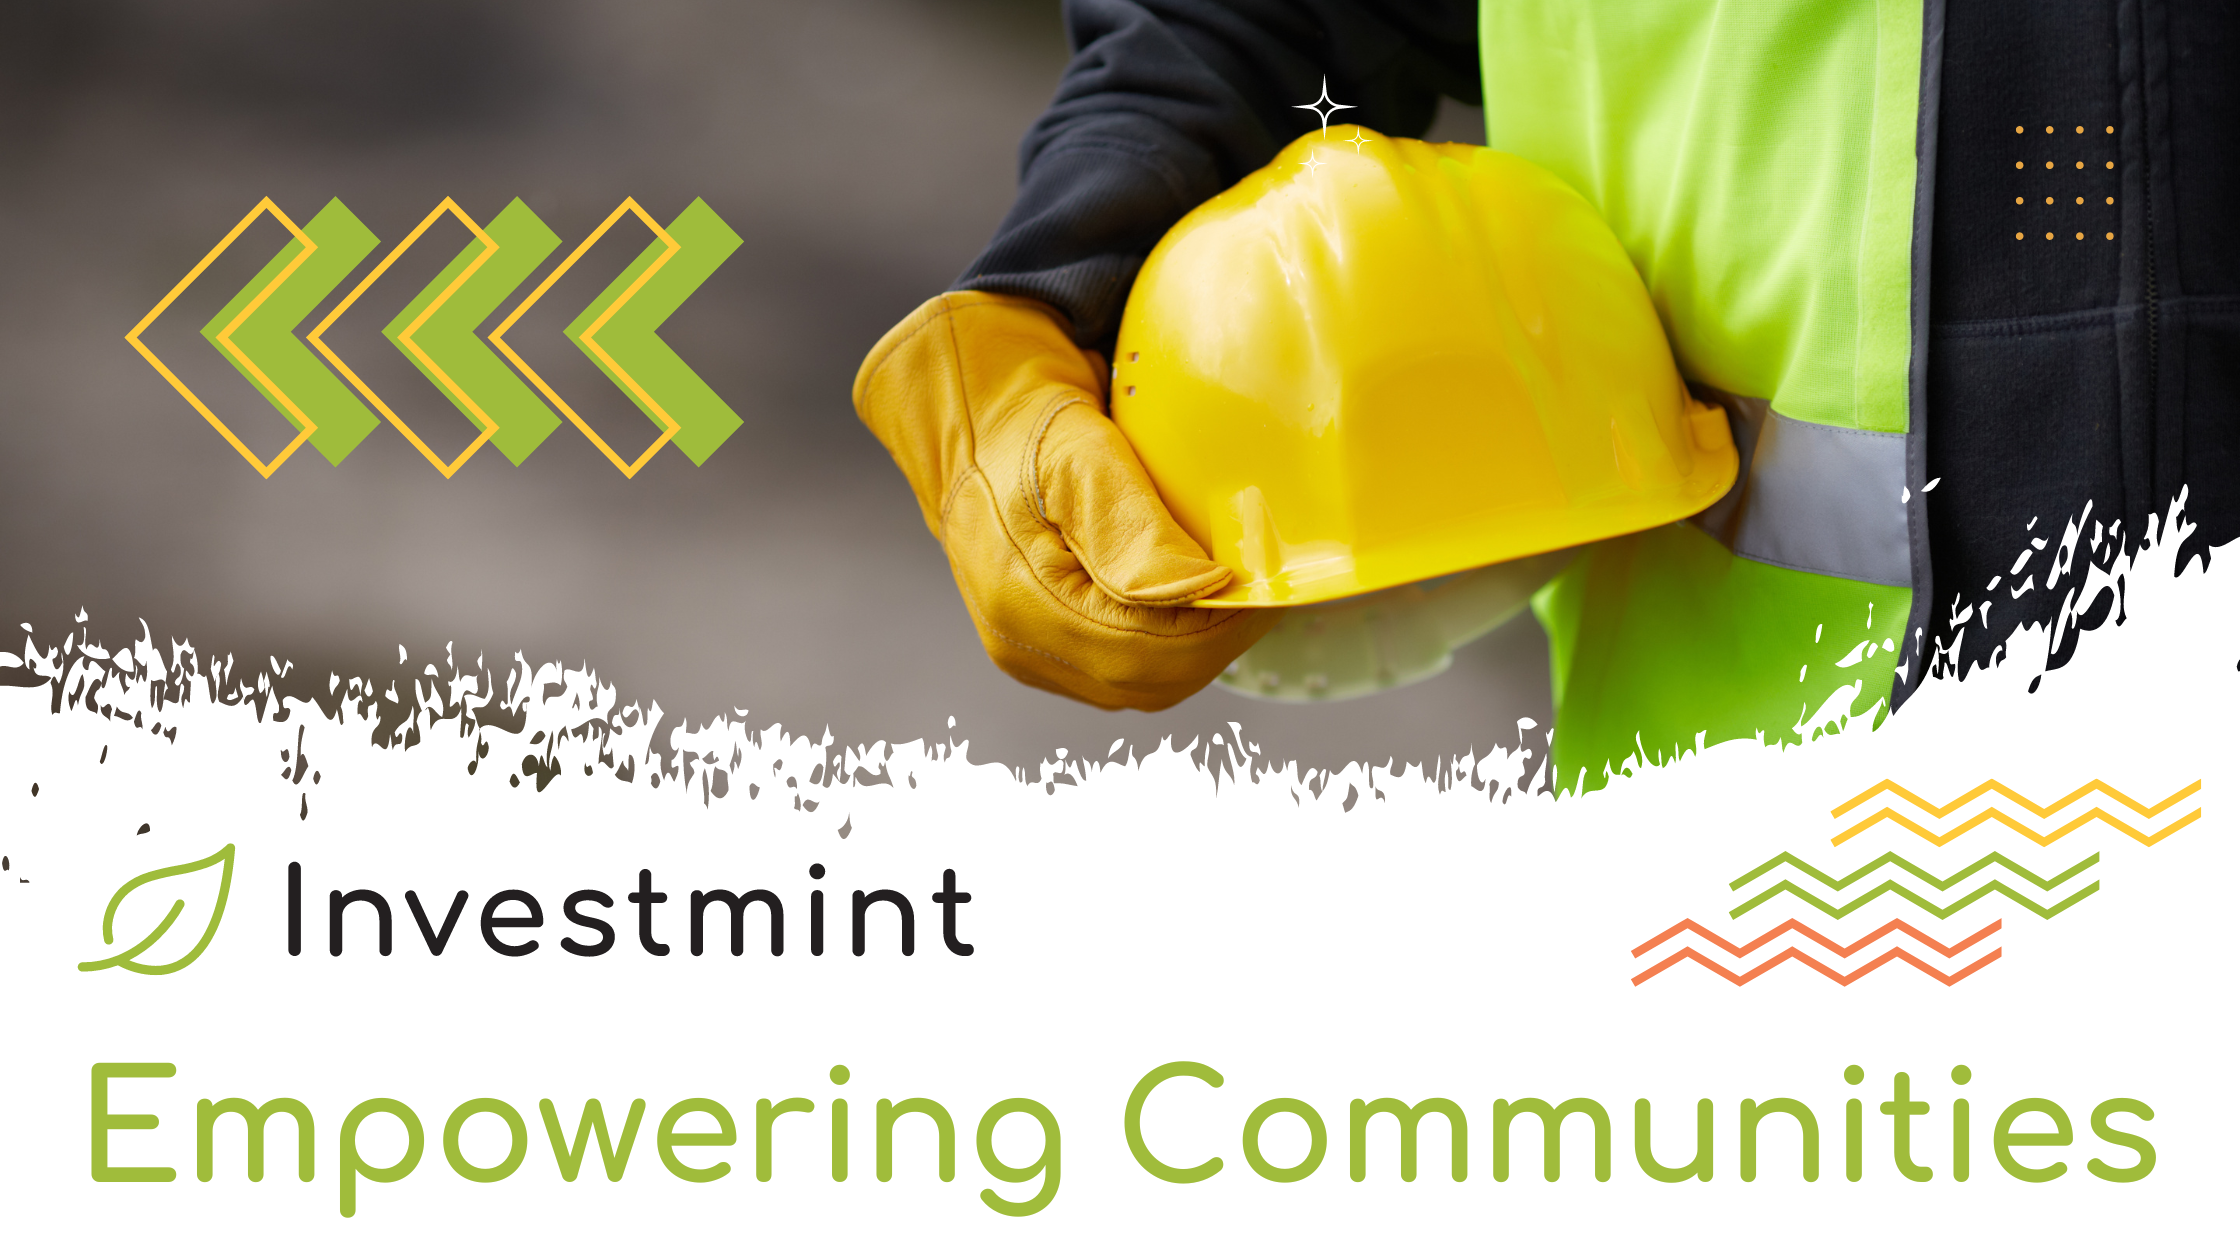 Empowering Communities: Investmint's Impactful Crowdfunding Initiatives